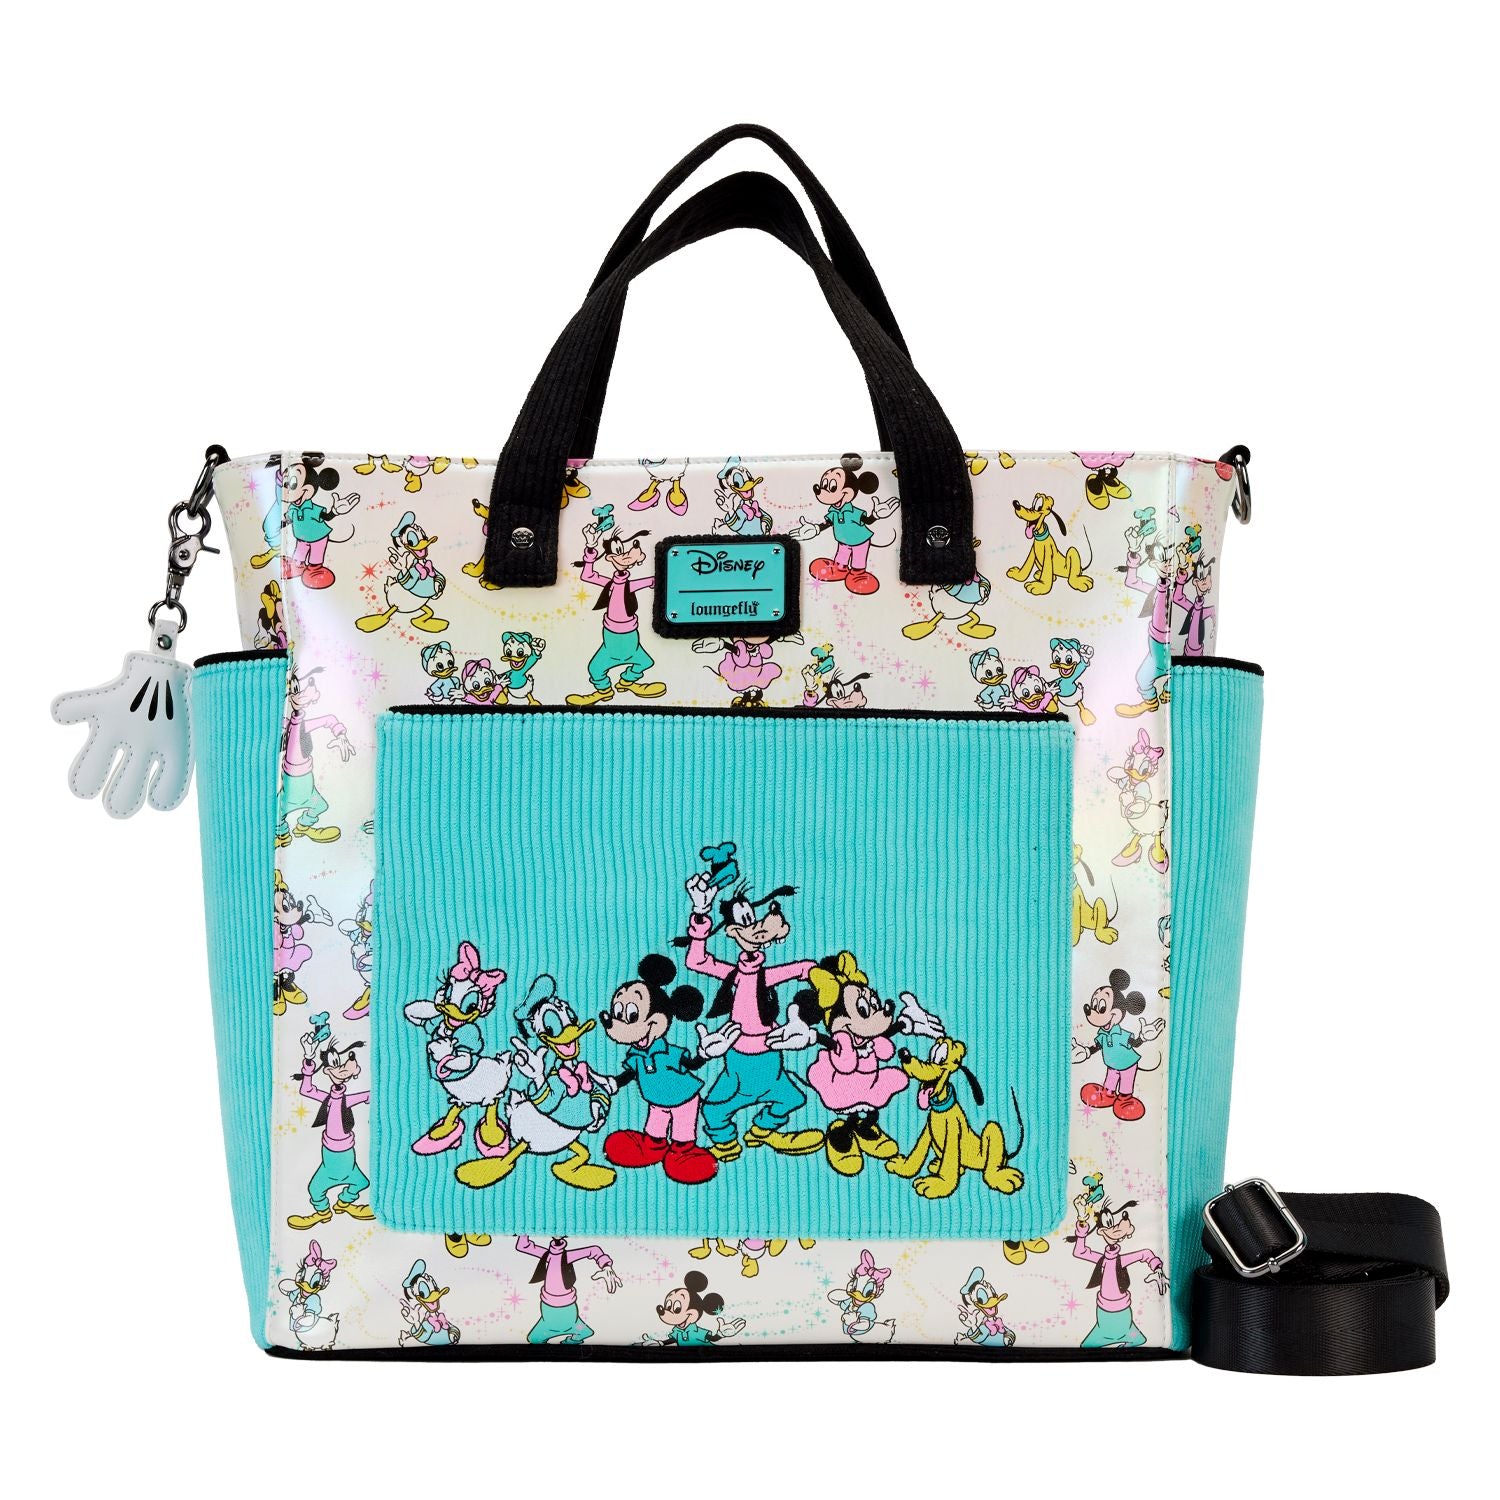 Disney Purse and Pin Holder